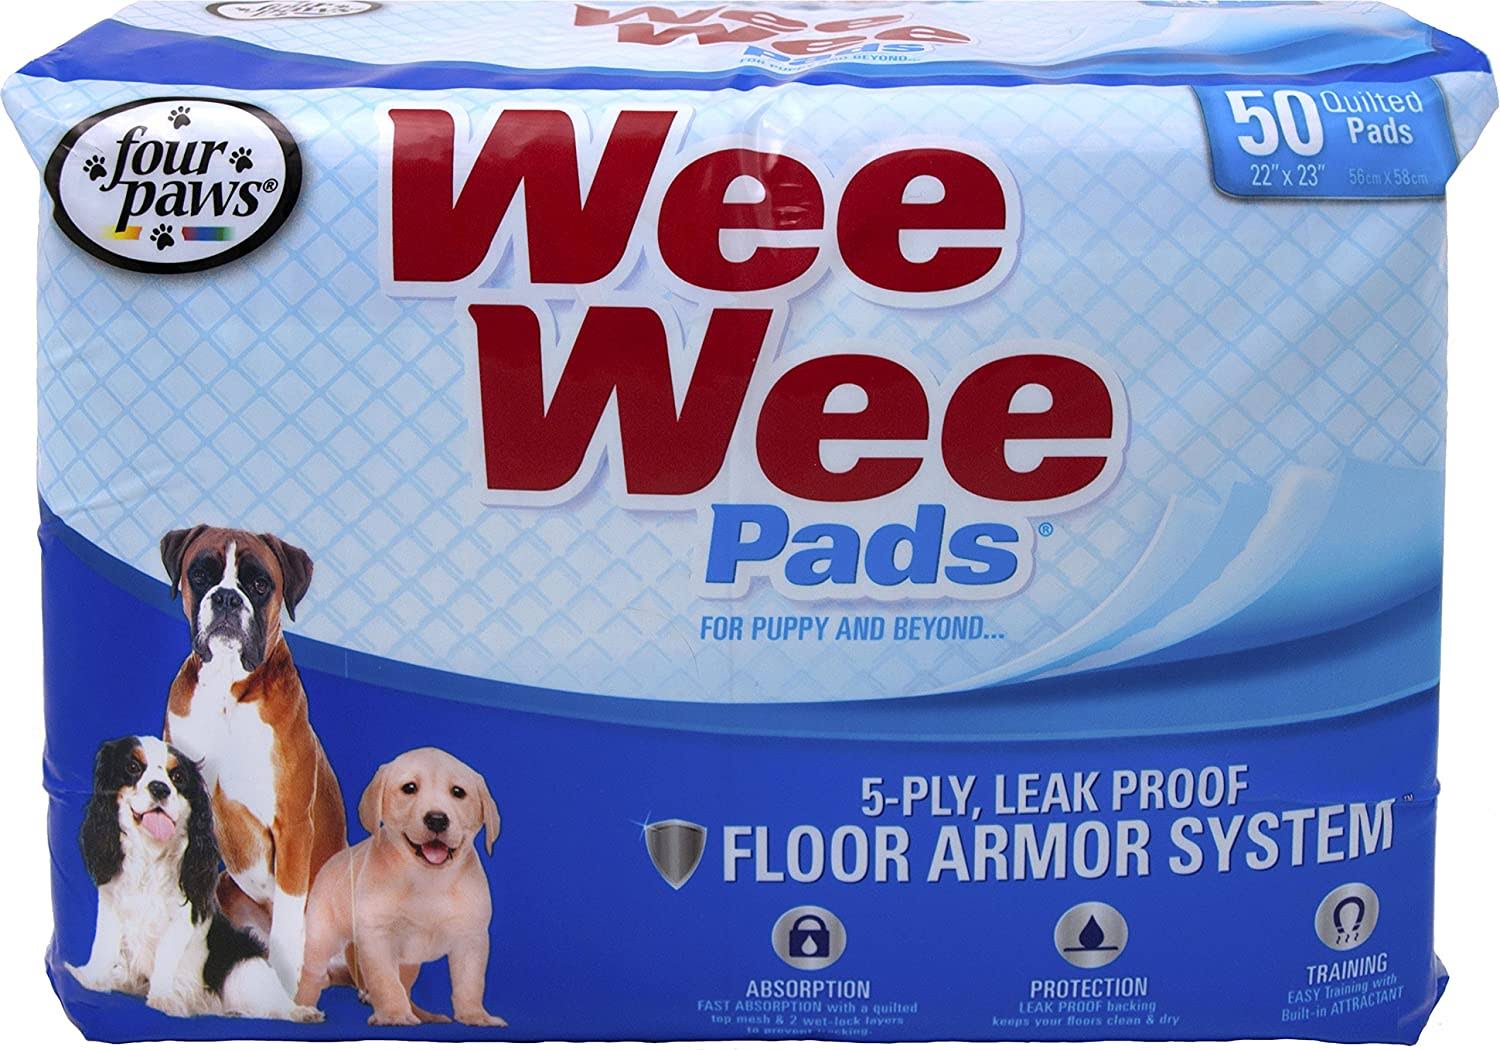 Four Paws Wee Wee Pads - 50 Pack